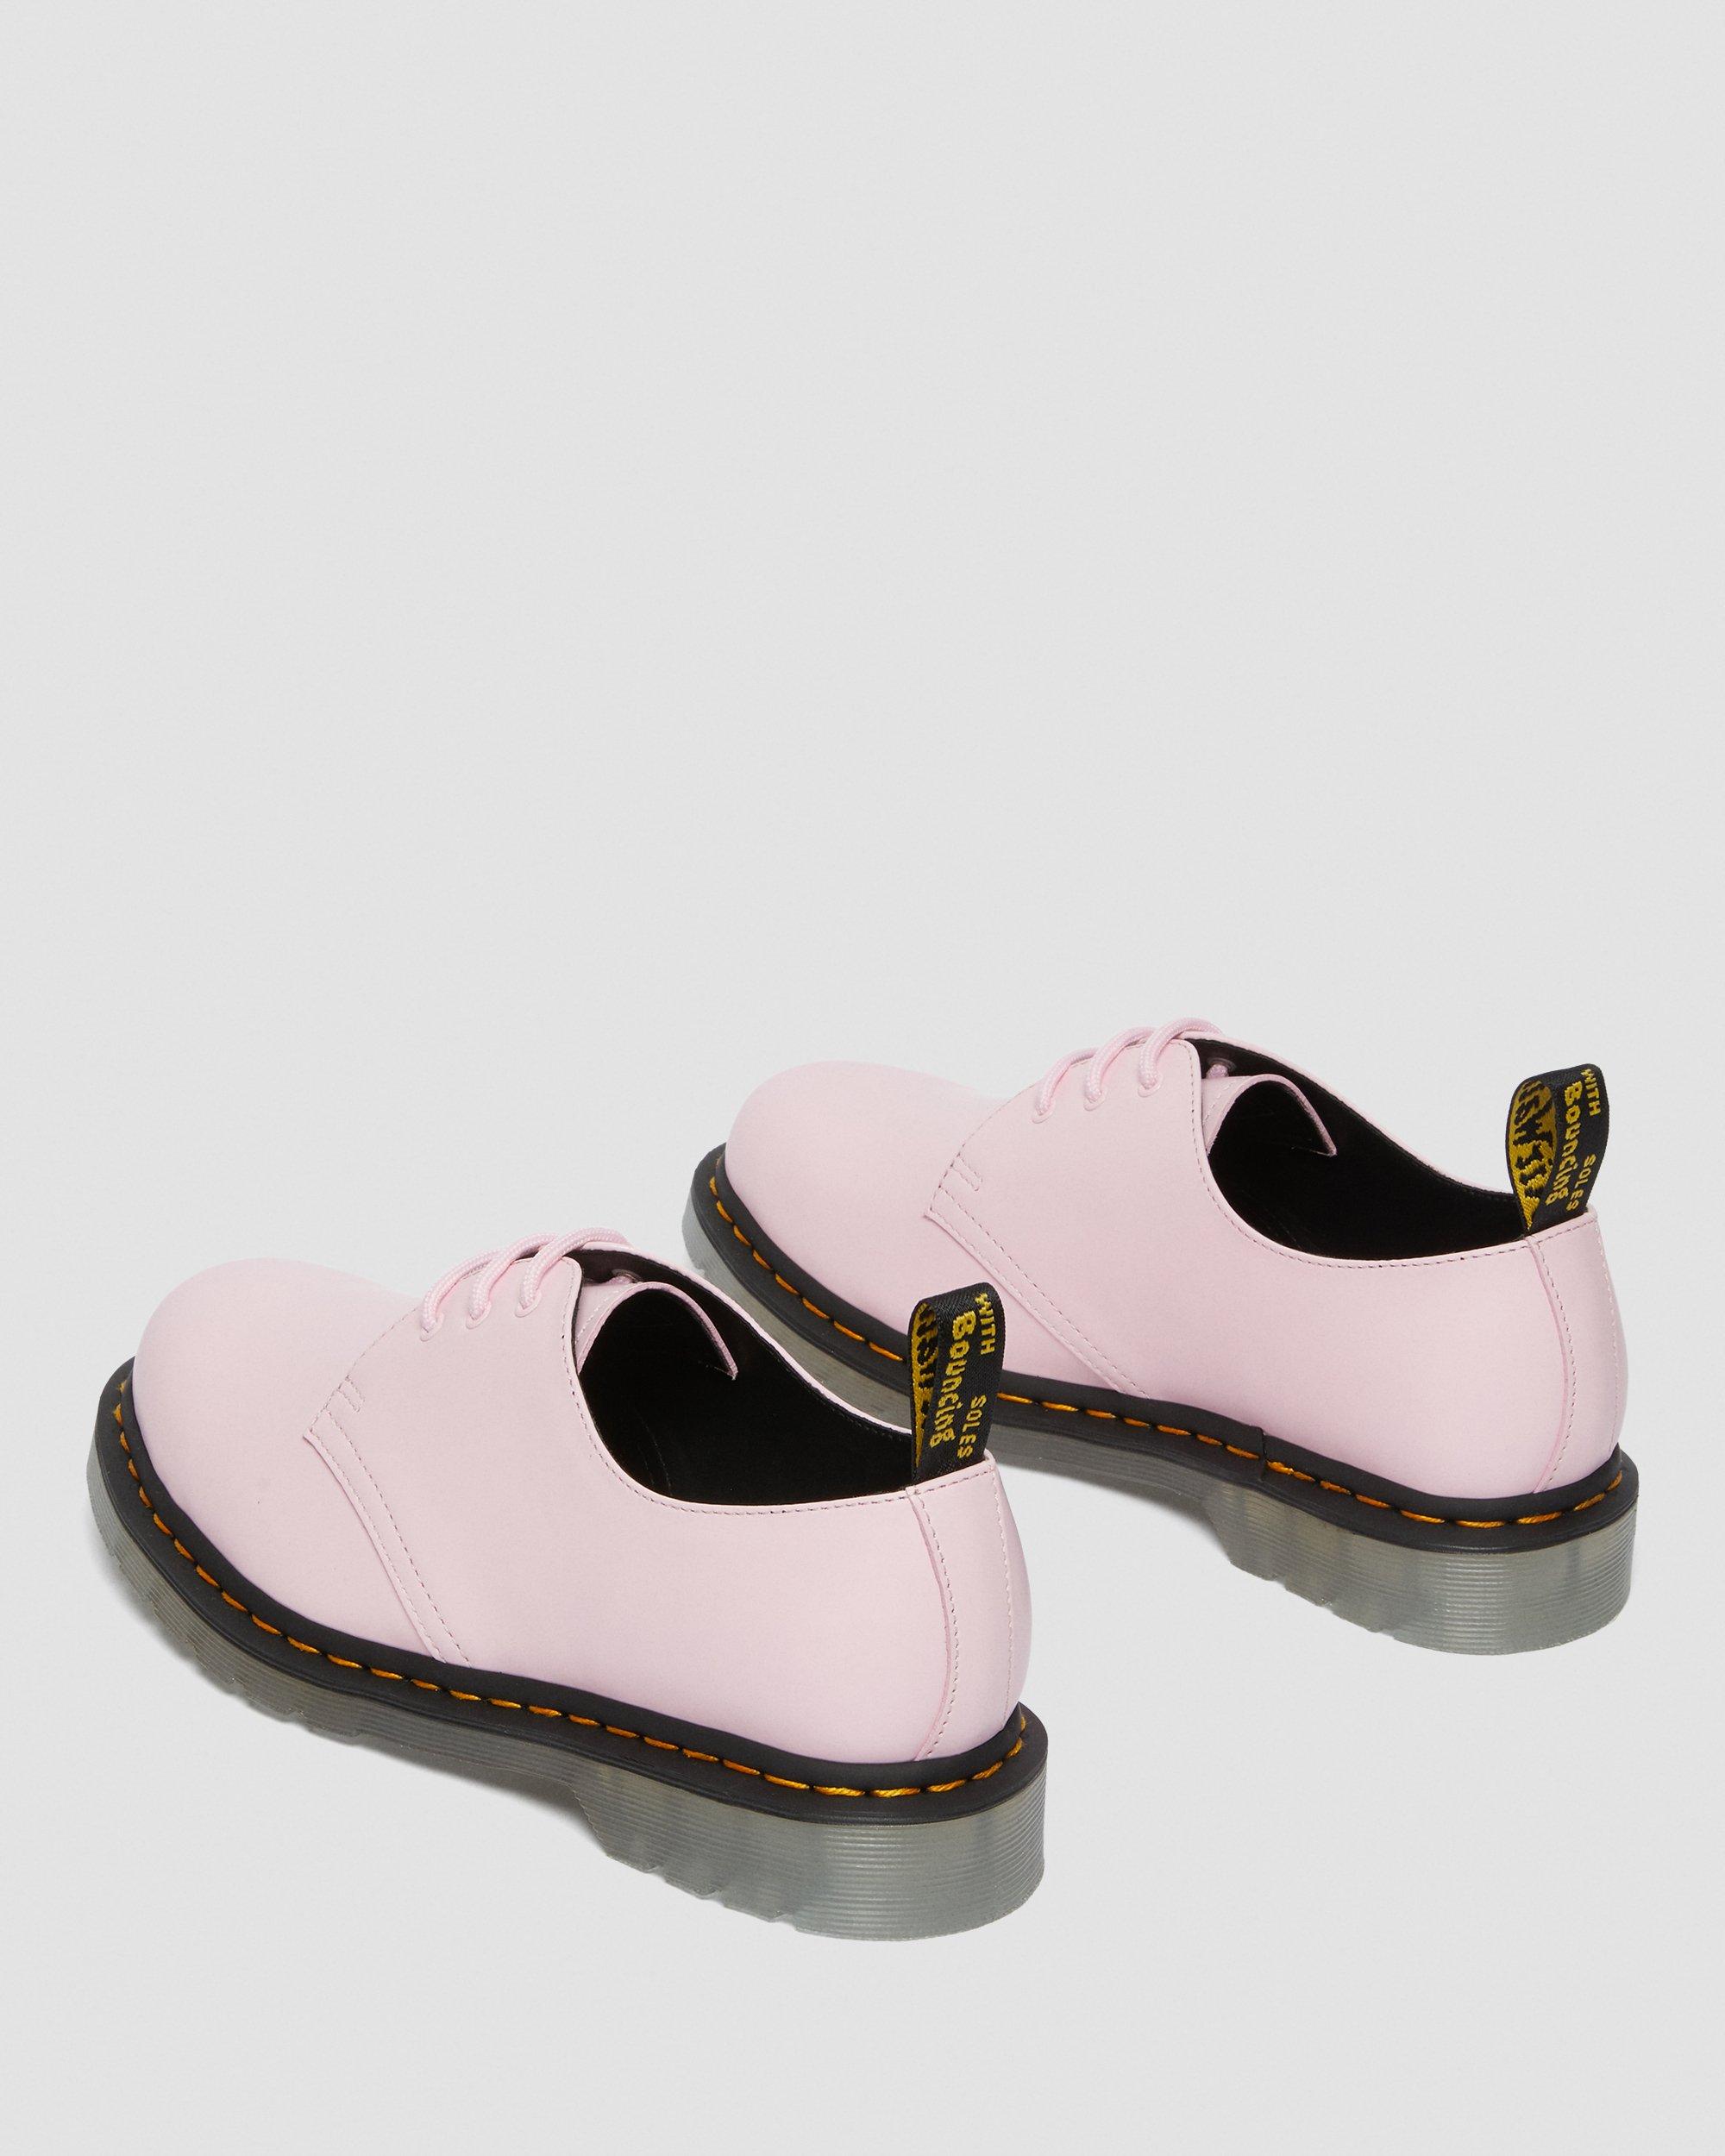 1461 Iced Smooth Leather Oxford Shoes | Dr. Martens